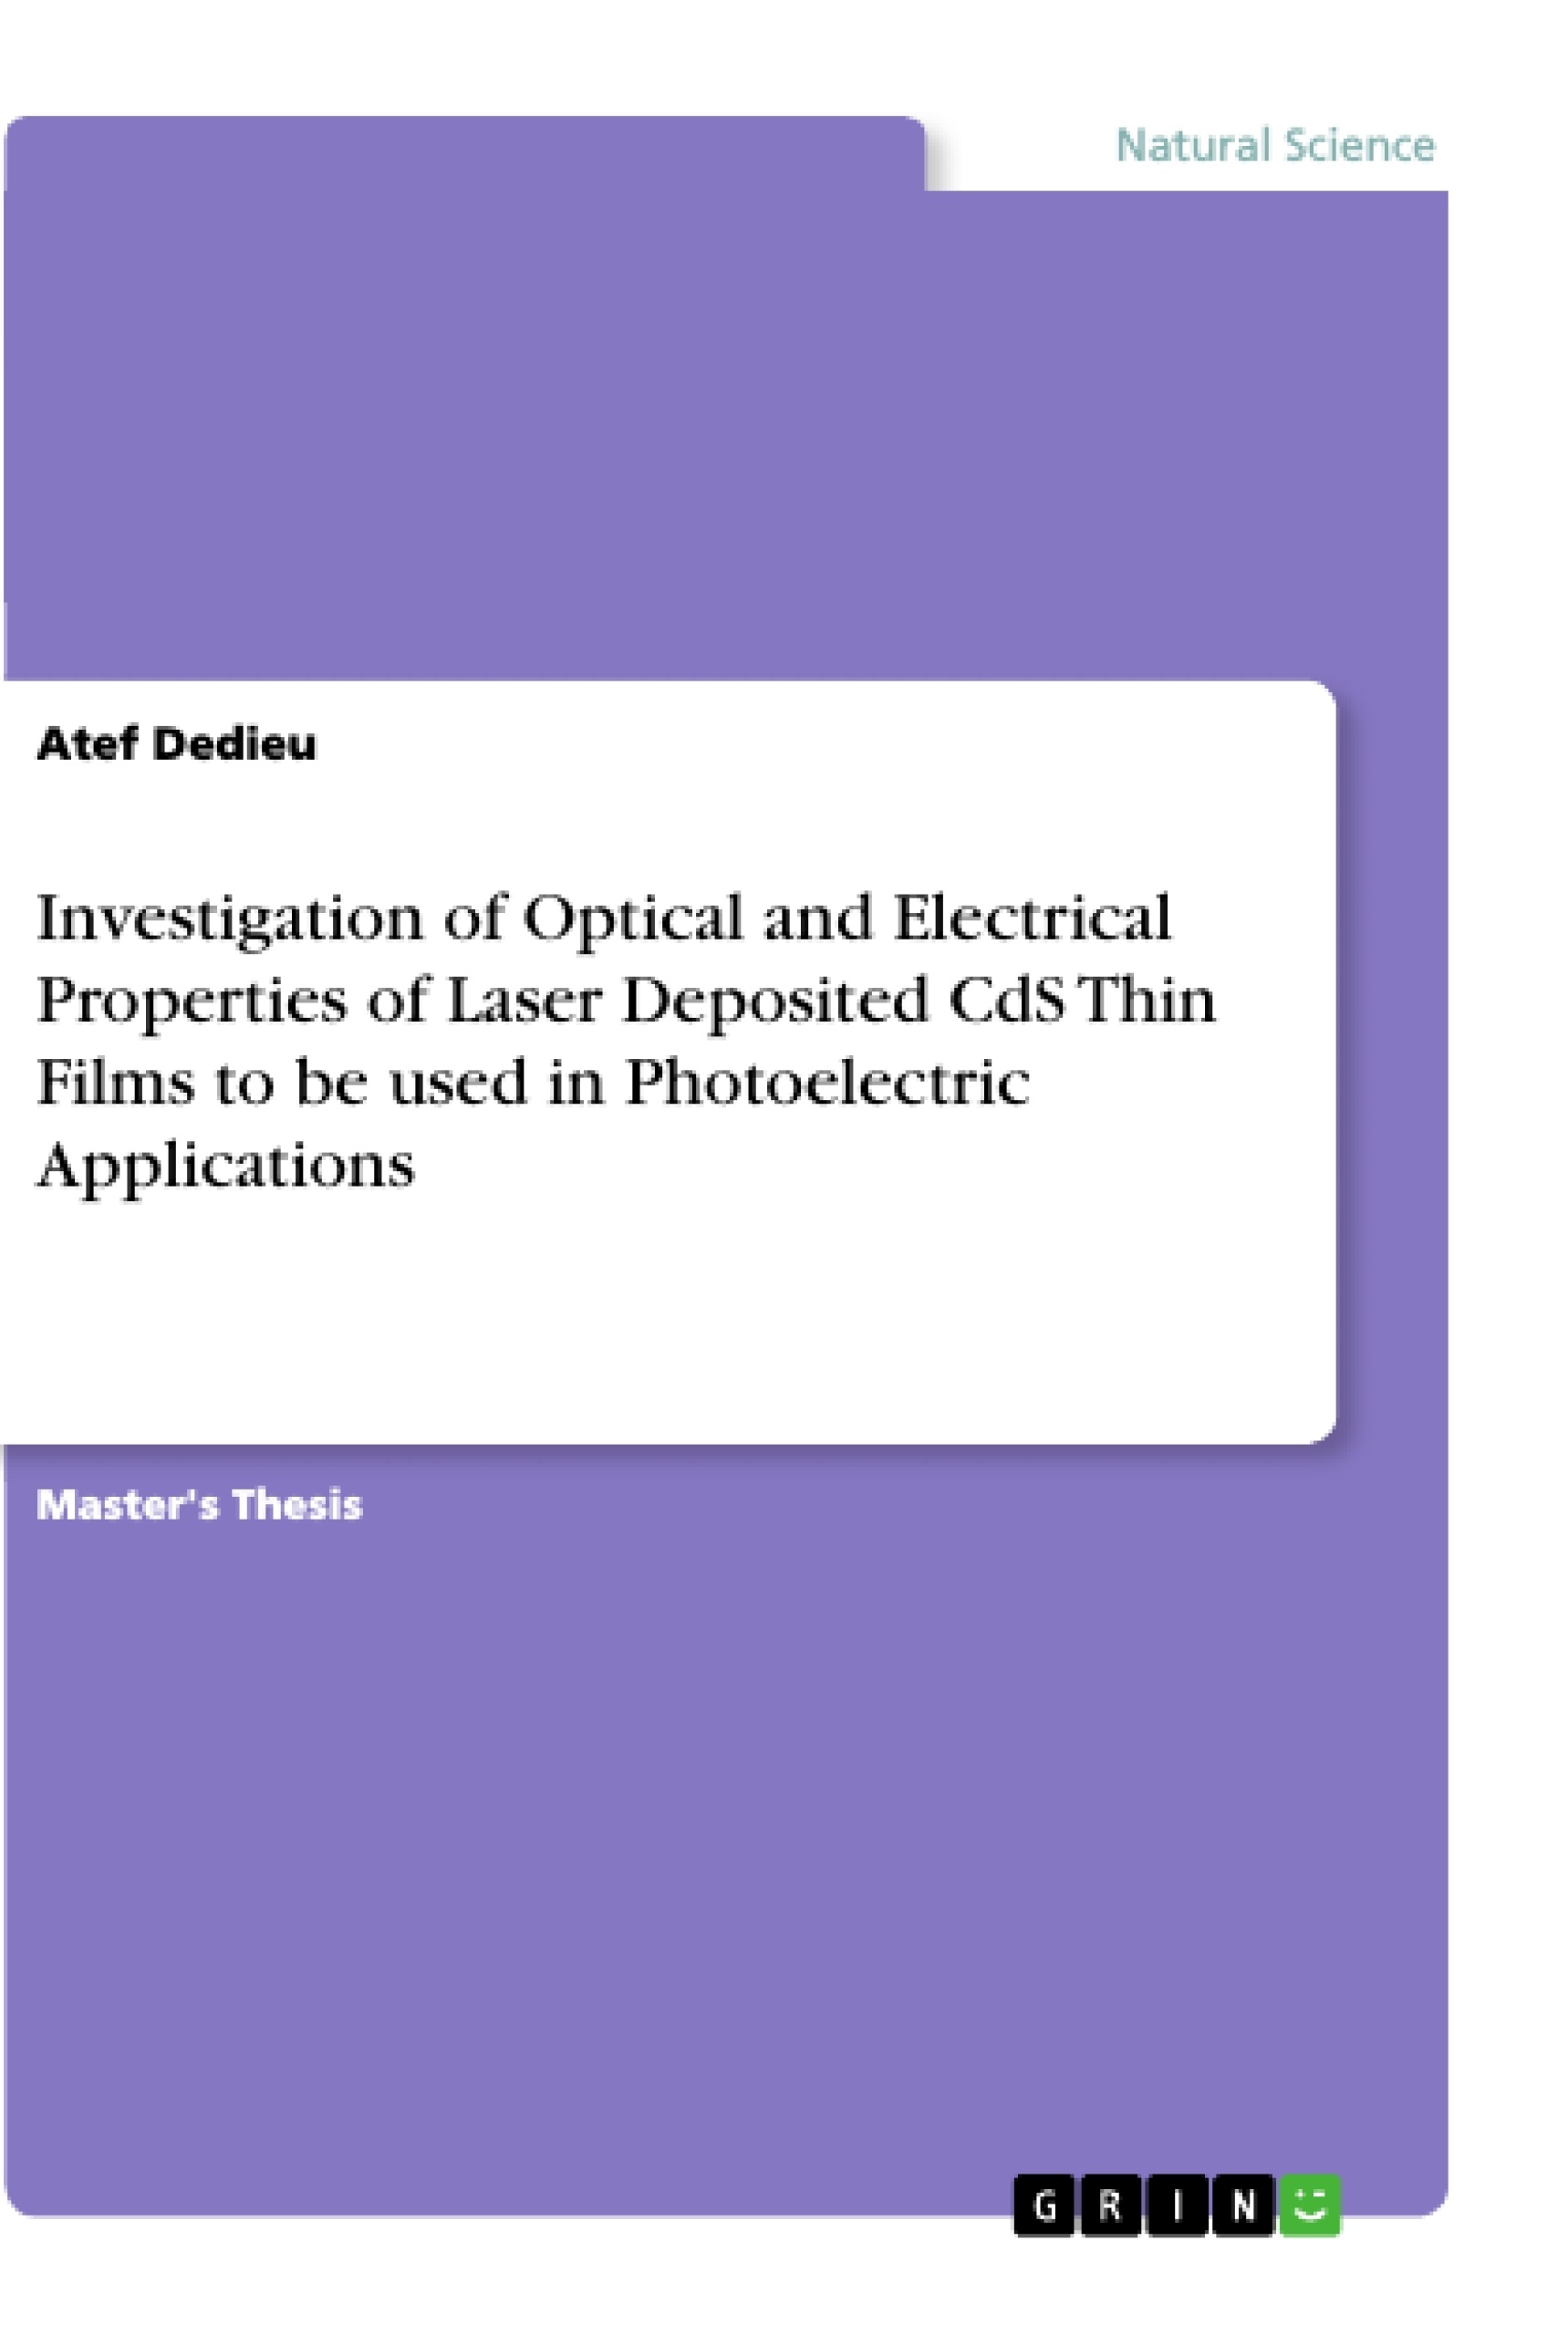 Título: Investigation of Optical and Electrical Properties of Laser Deposited CdS Thin Films to be used in Photoelectric Applications